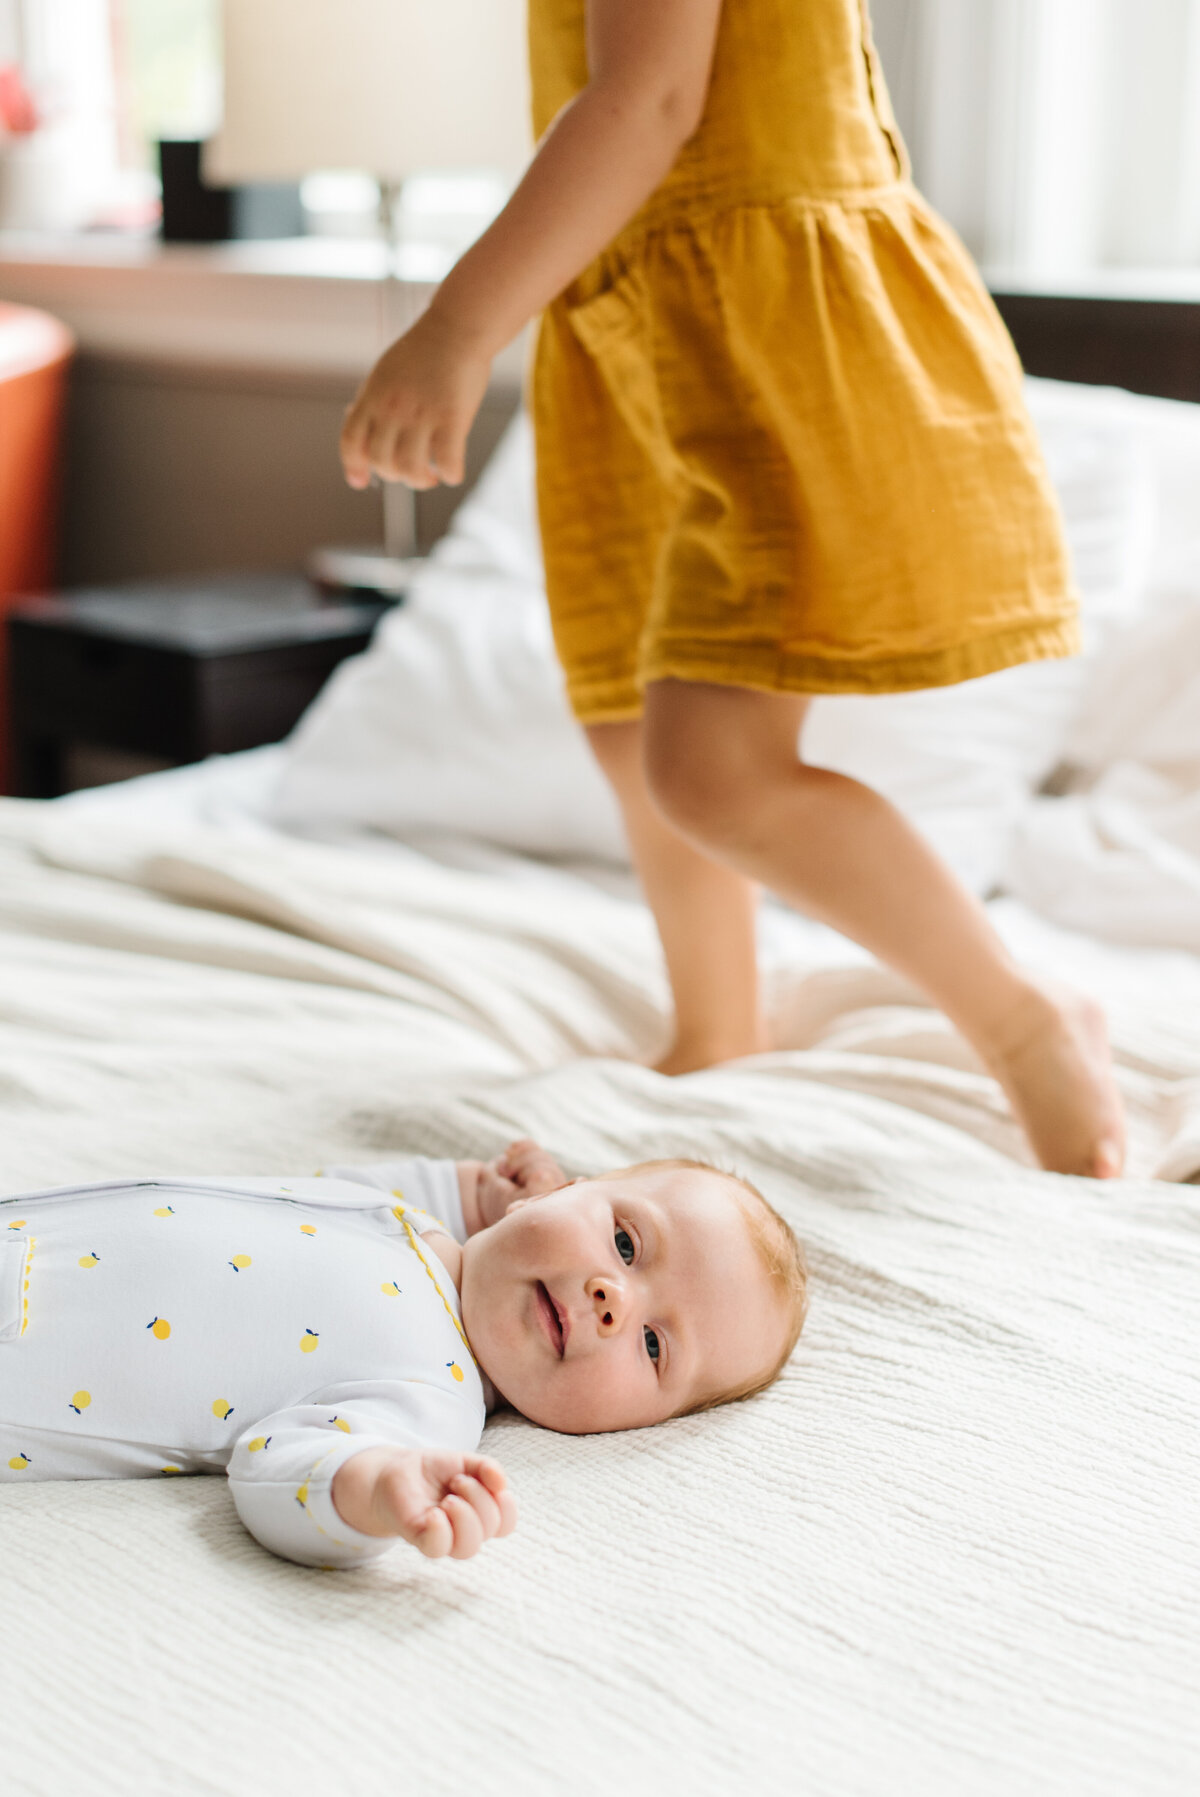 Infant laying on bed with toddler standing on bed behind - Washington DC Newborn Photographer